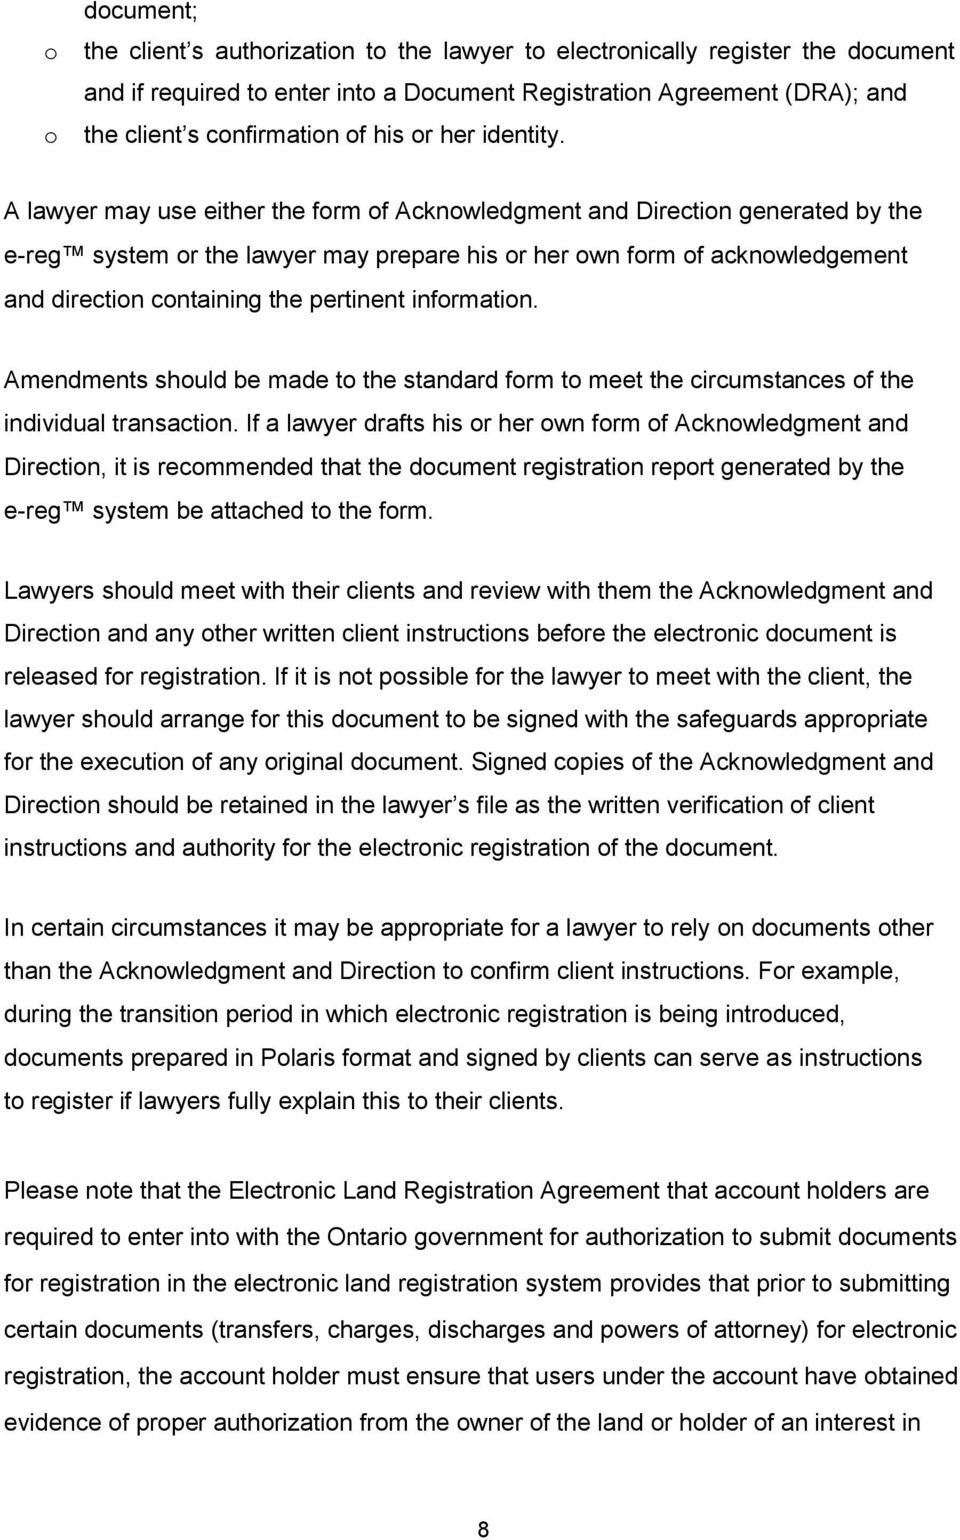 A lawyer may use either the form of Acknowledgment and Direction generated by the e-reg system or the lawyer may prepare his or her own form of acknowledgement and direction containing the pertinent